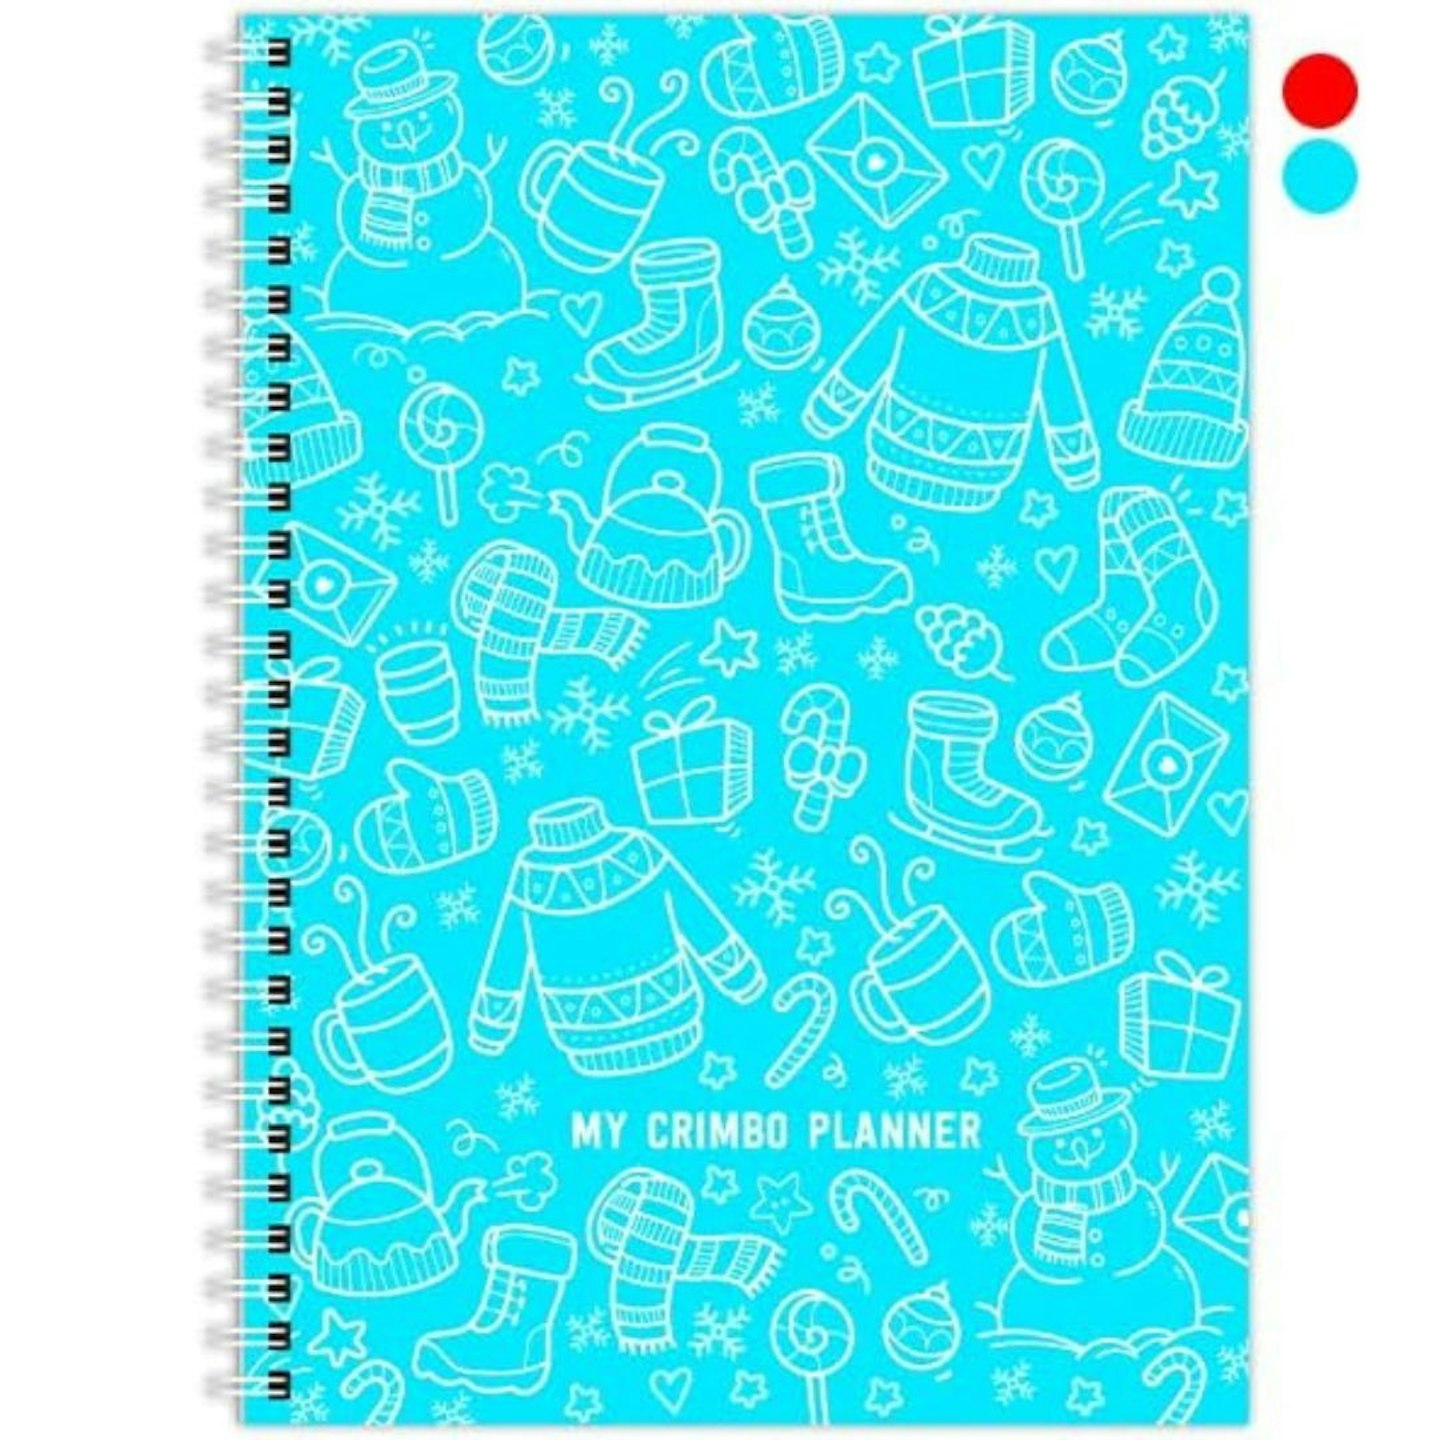 The best Christmas planners: My Crimbo Planner 